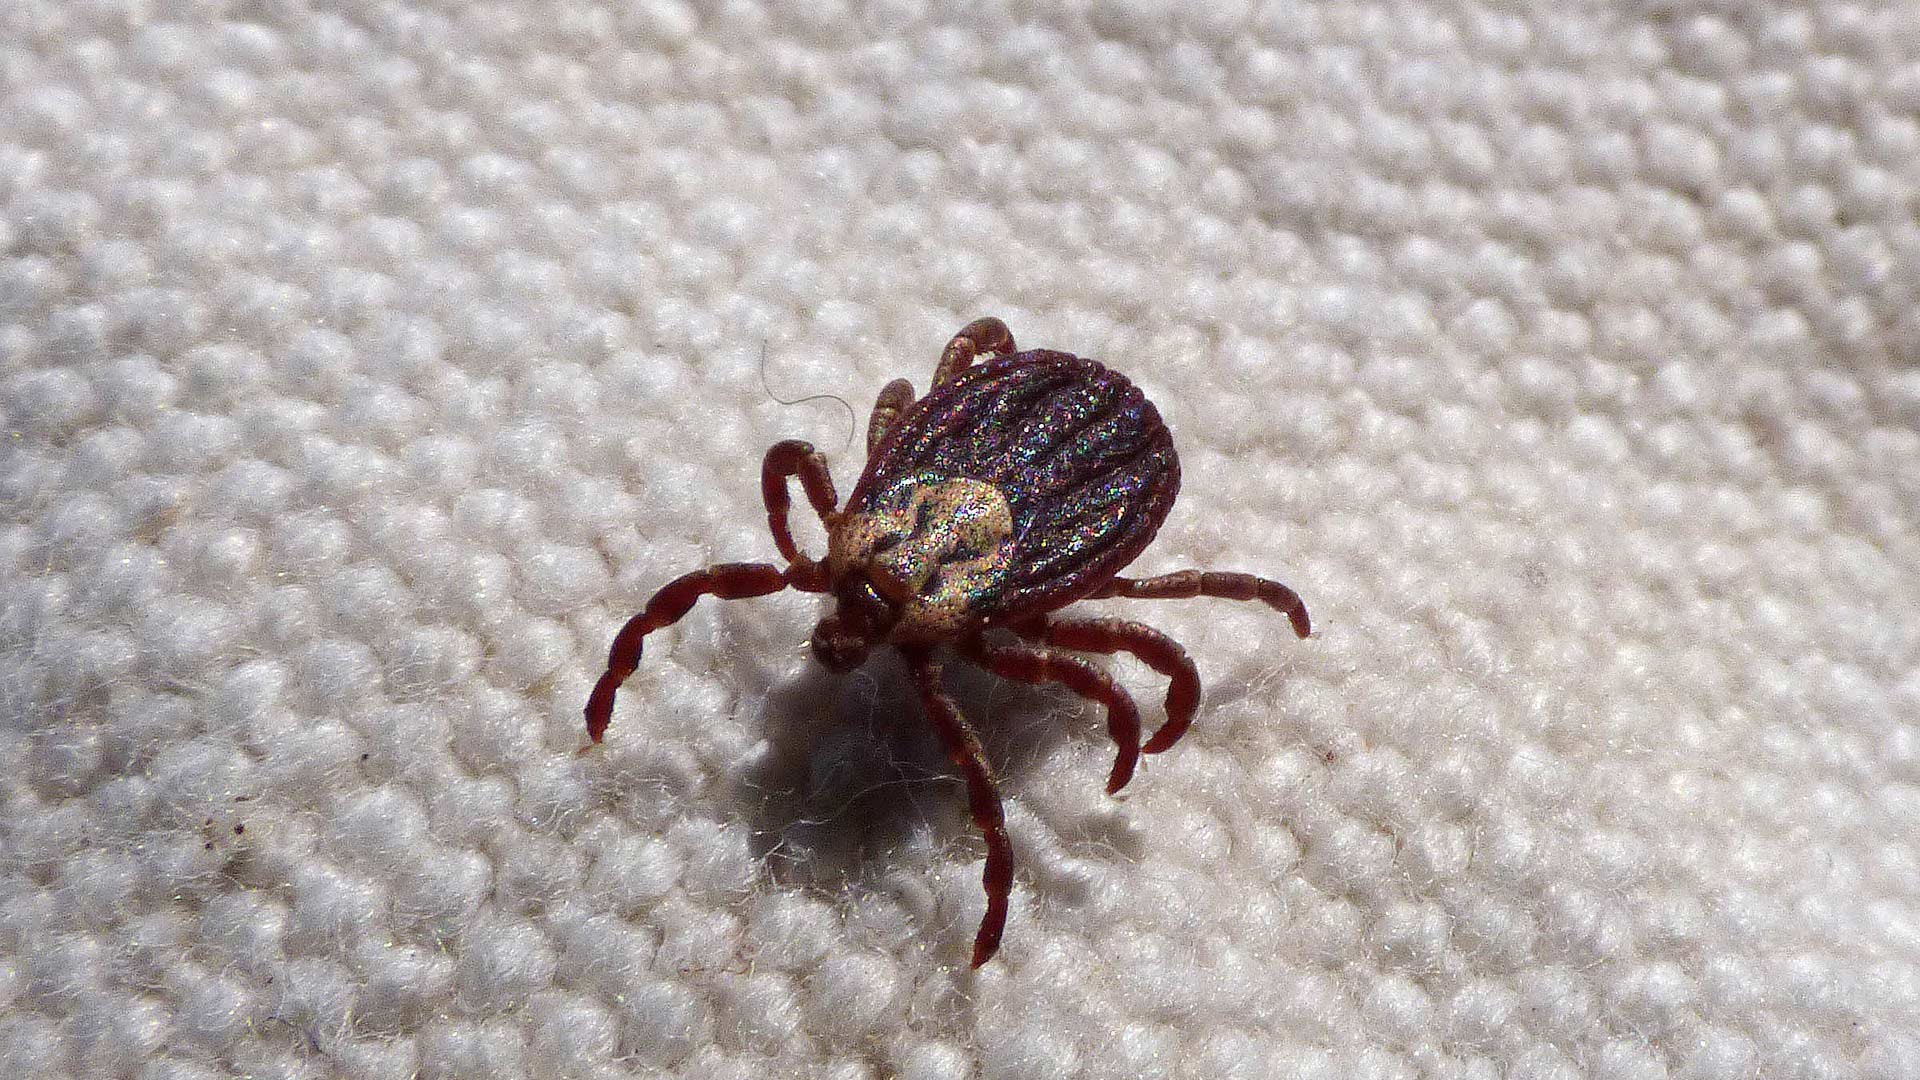 Ticks are well-known for carrying dangerous blood-borne illnesses.